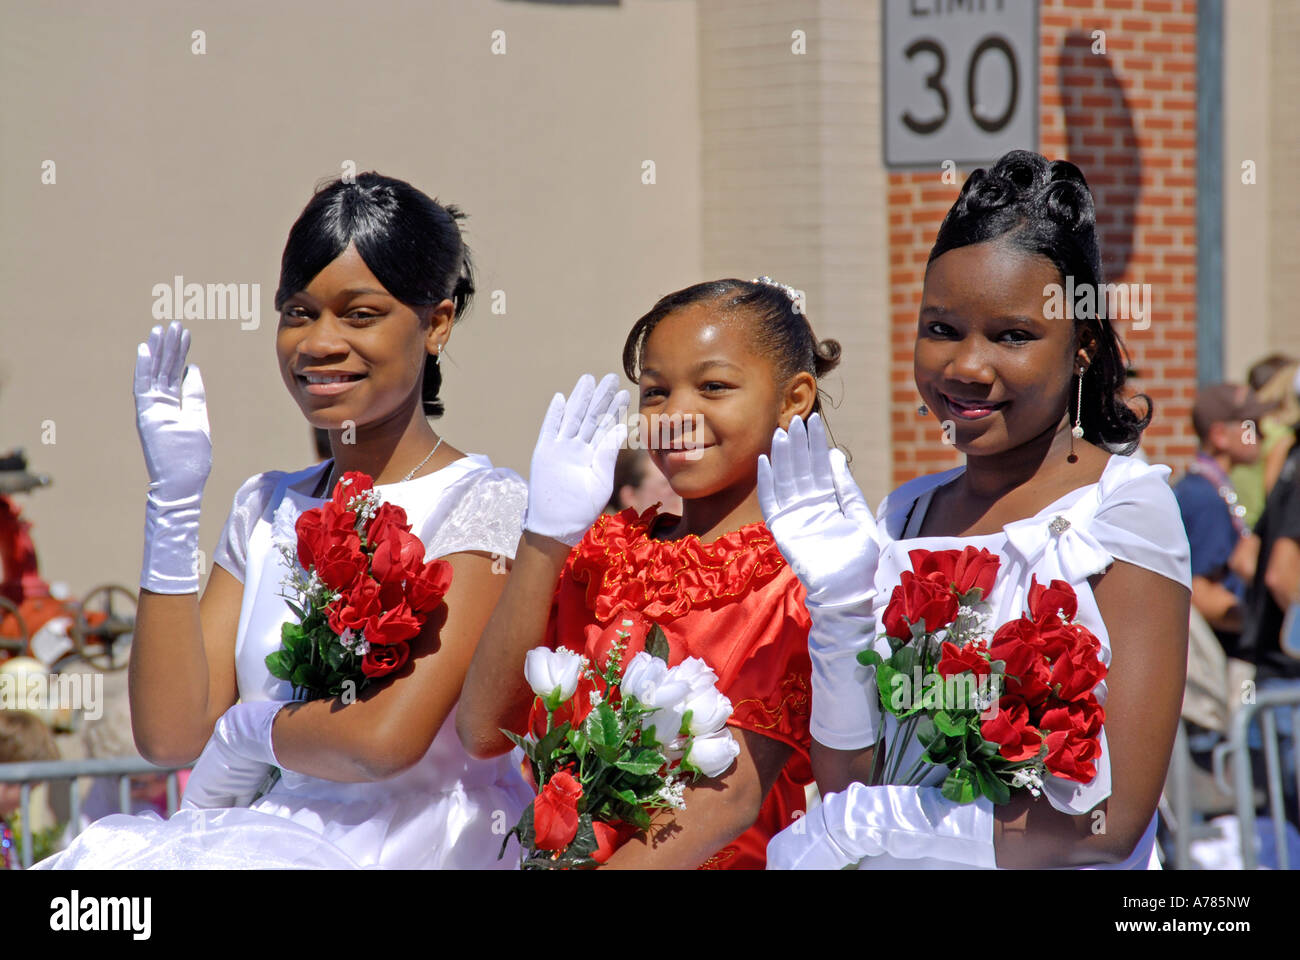 Young African American Beauty Queens Participate in Strawberry Festival Parade Plant City Florida FL FLA USA US Stock Photo